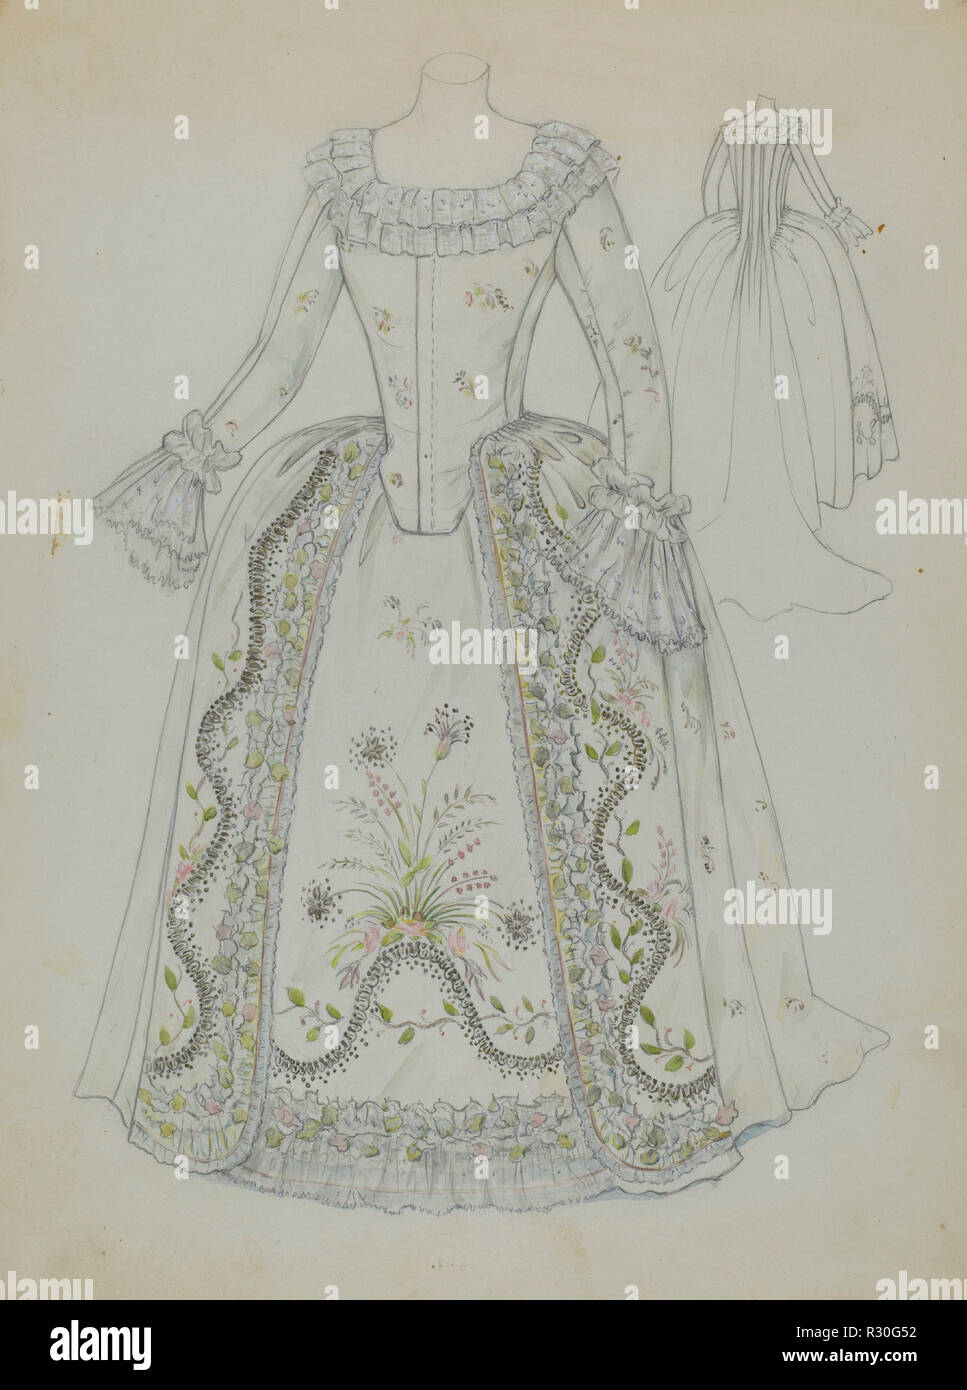 Dress. Dated: c. 1936. Dimensions: overall: 30.5 x 23 cm (12 x 9 1/16 in.)  Original IAD Object: 65' long. Medium: watercolor, graphite, and gouache on paper. Museum: National Gallery of Art, Washington DC. Author: Jessie M. Benge. Stock Photo